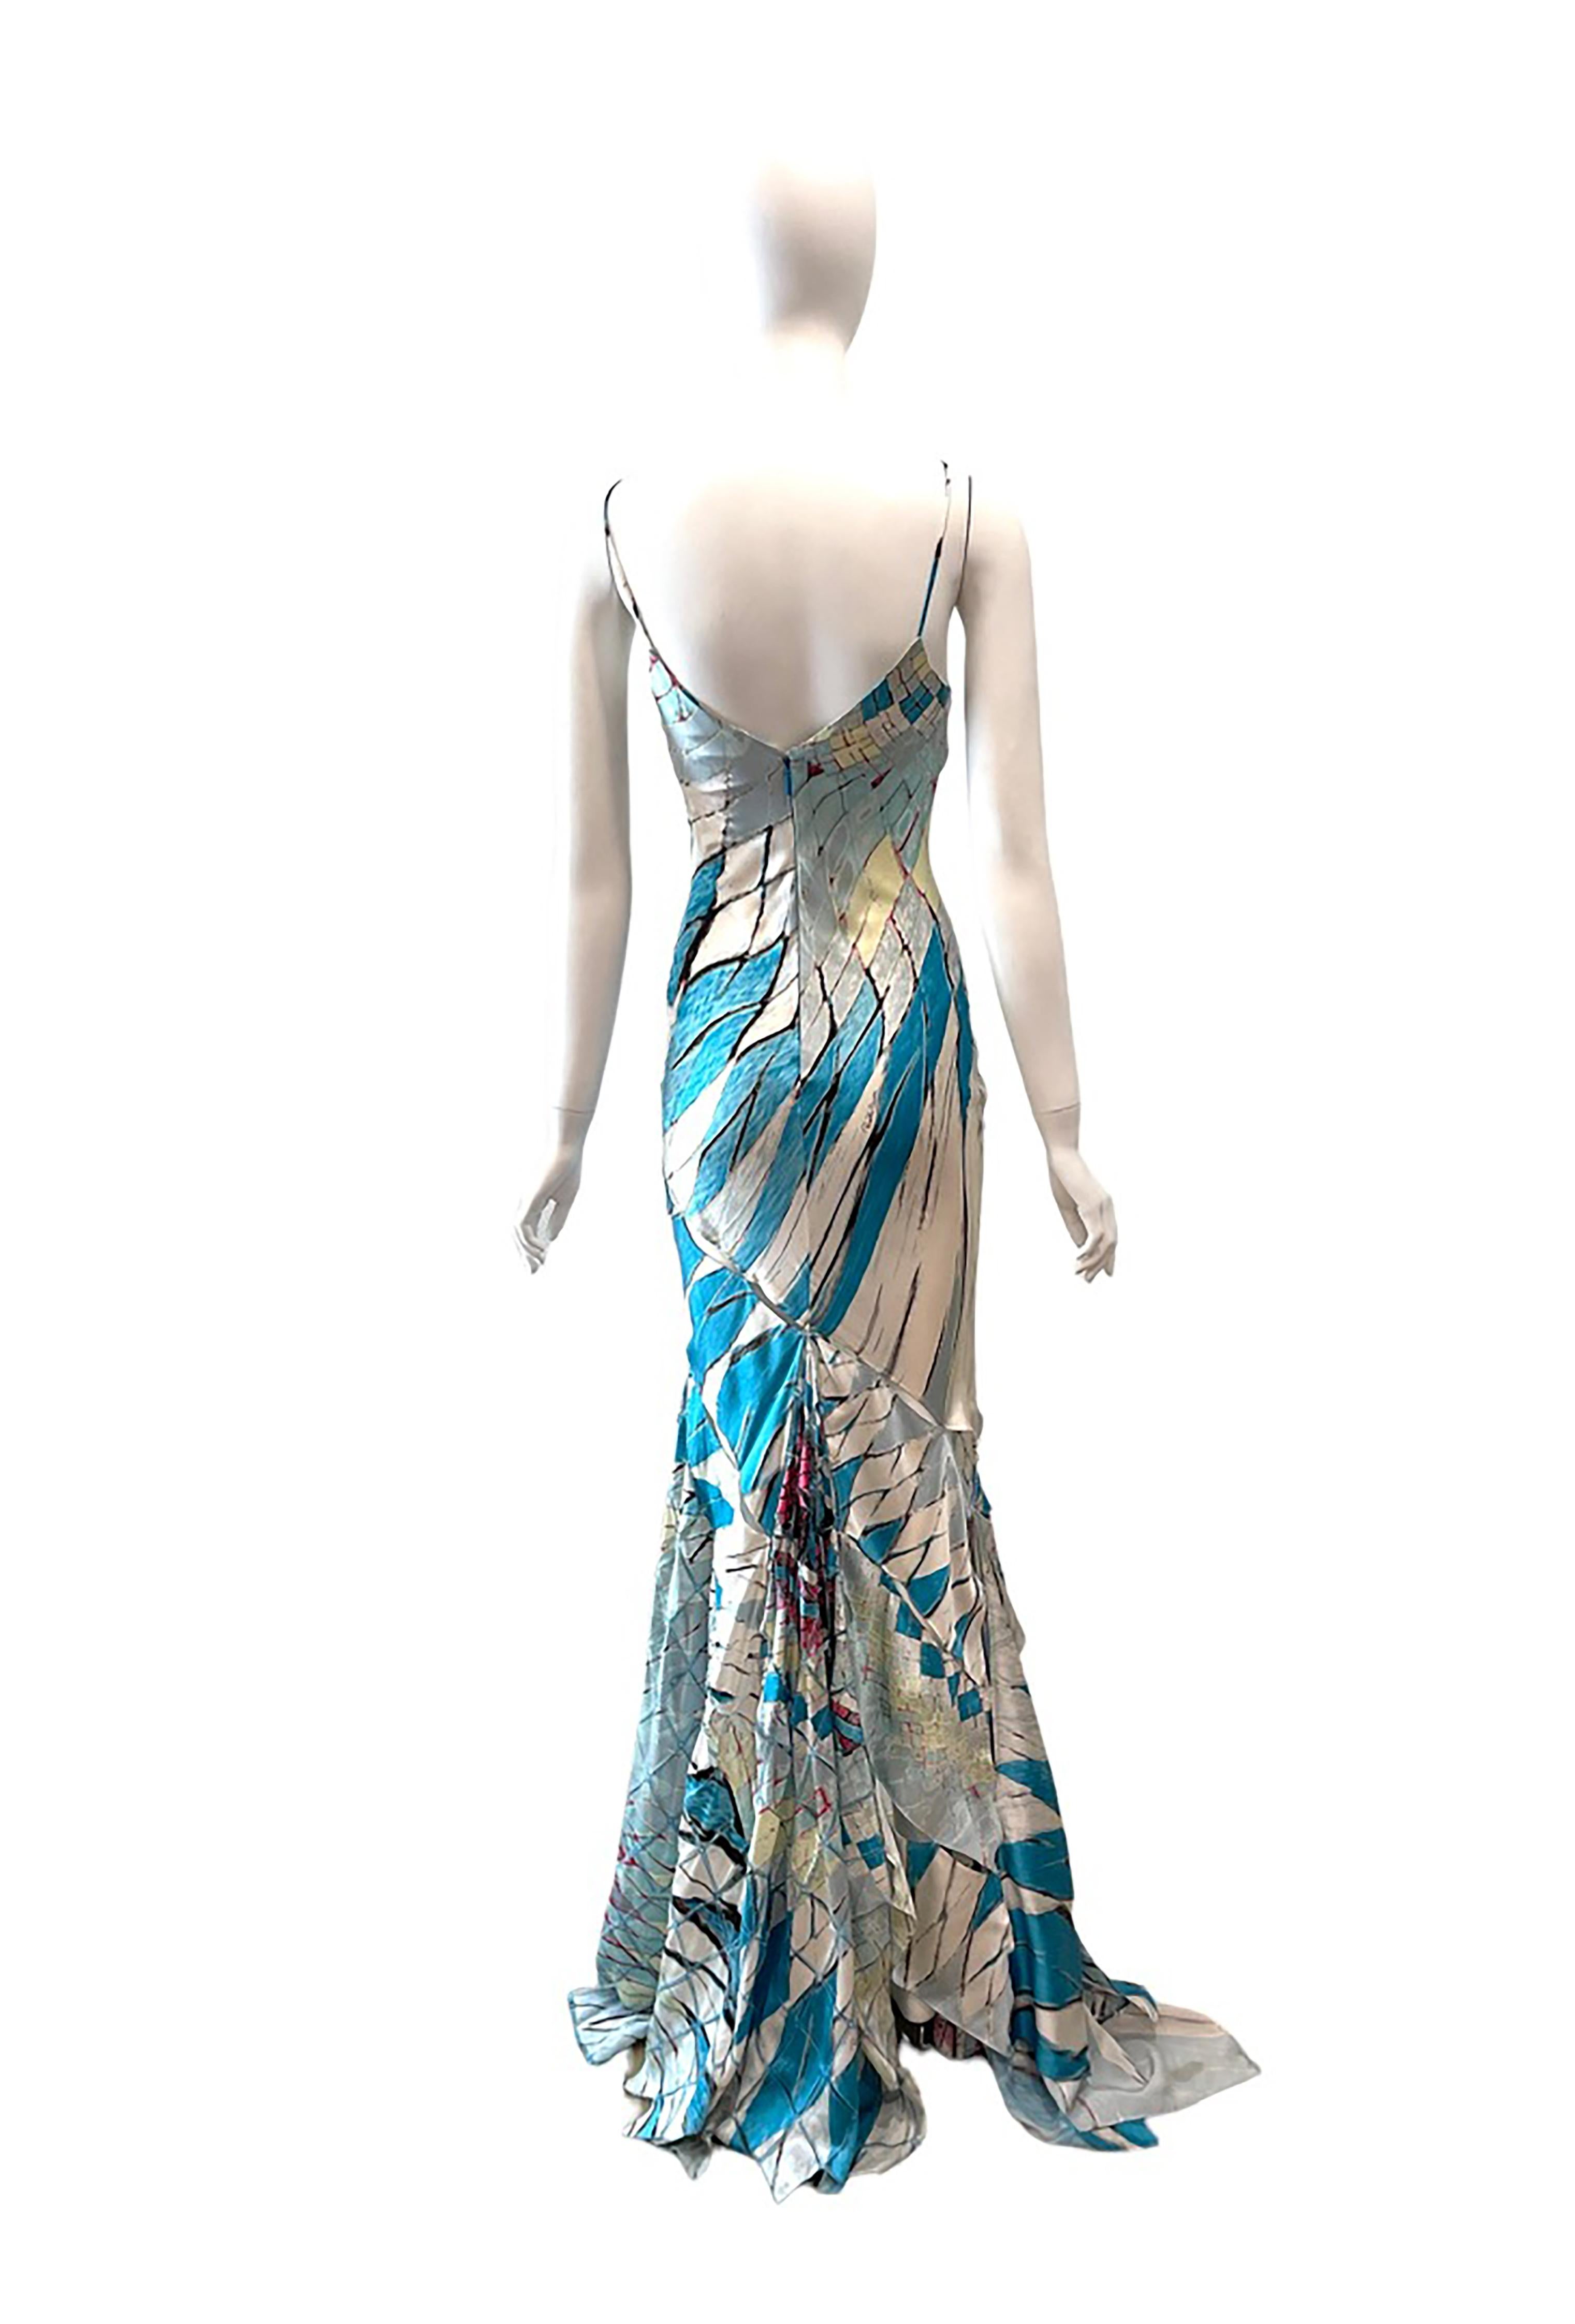 Gray S/S 2004 Roberto Cavalli Cut-Out Gown